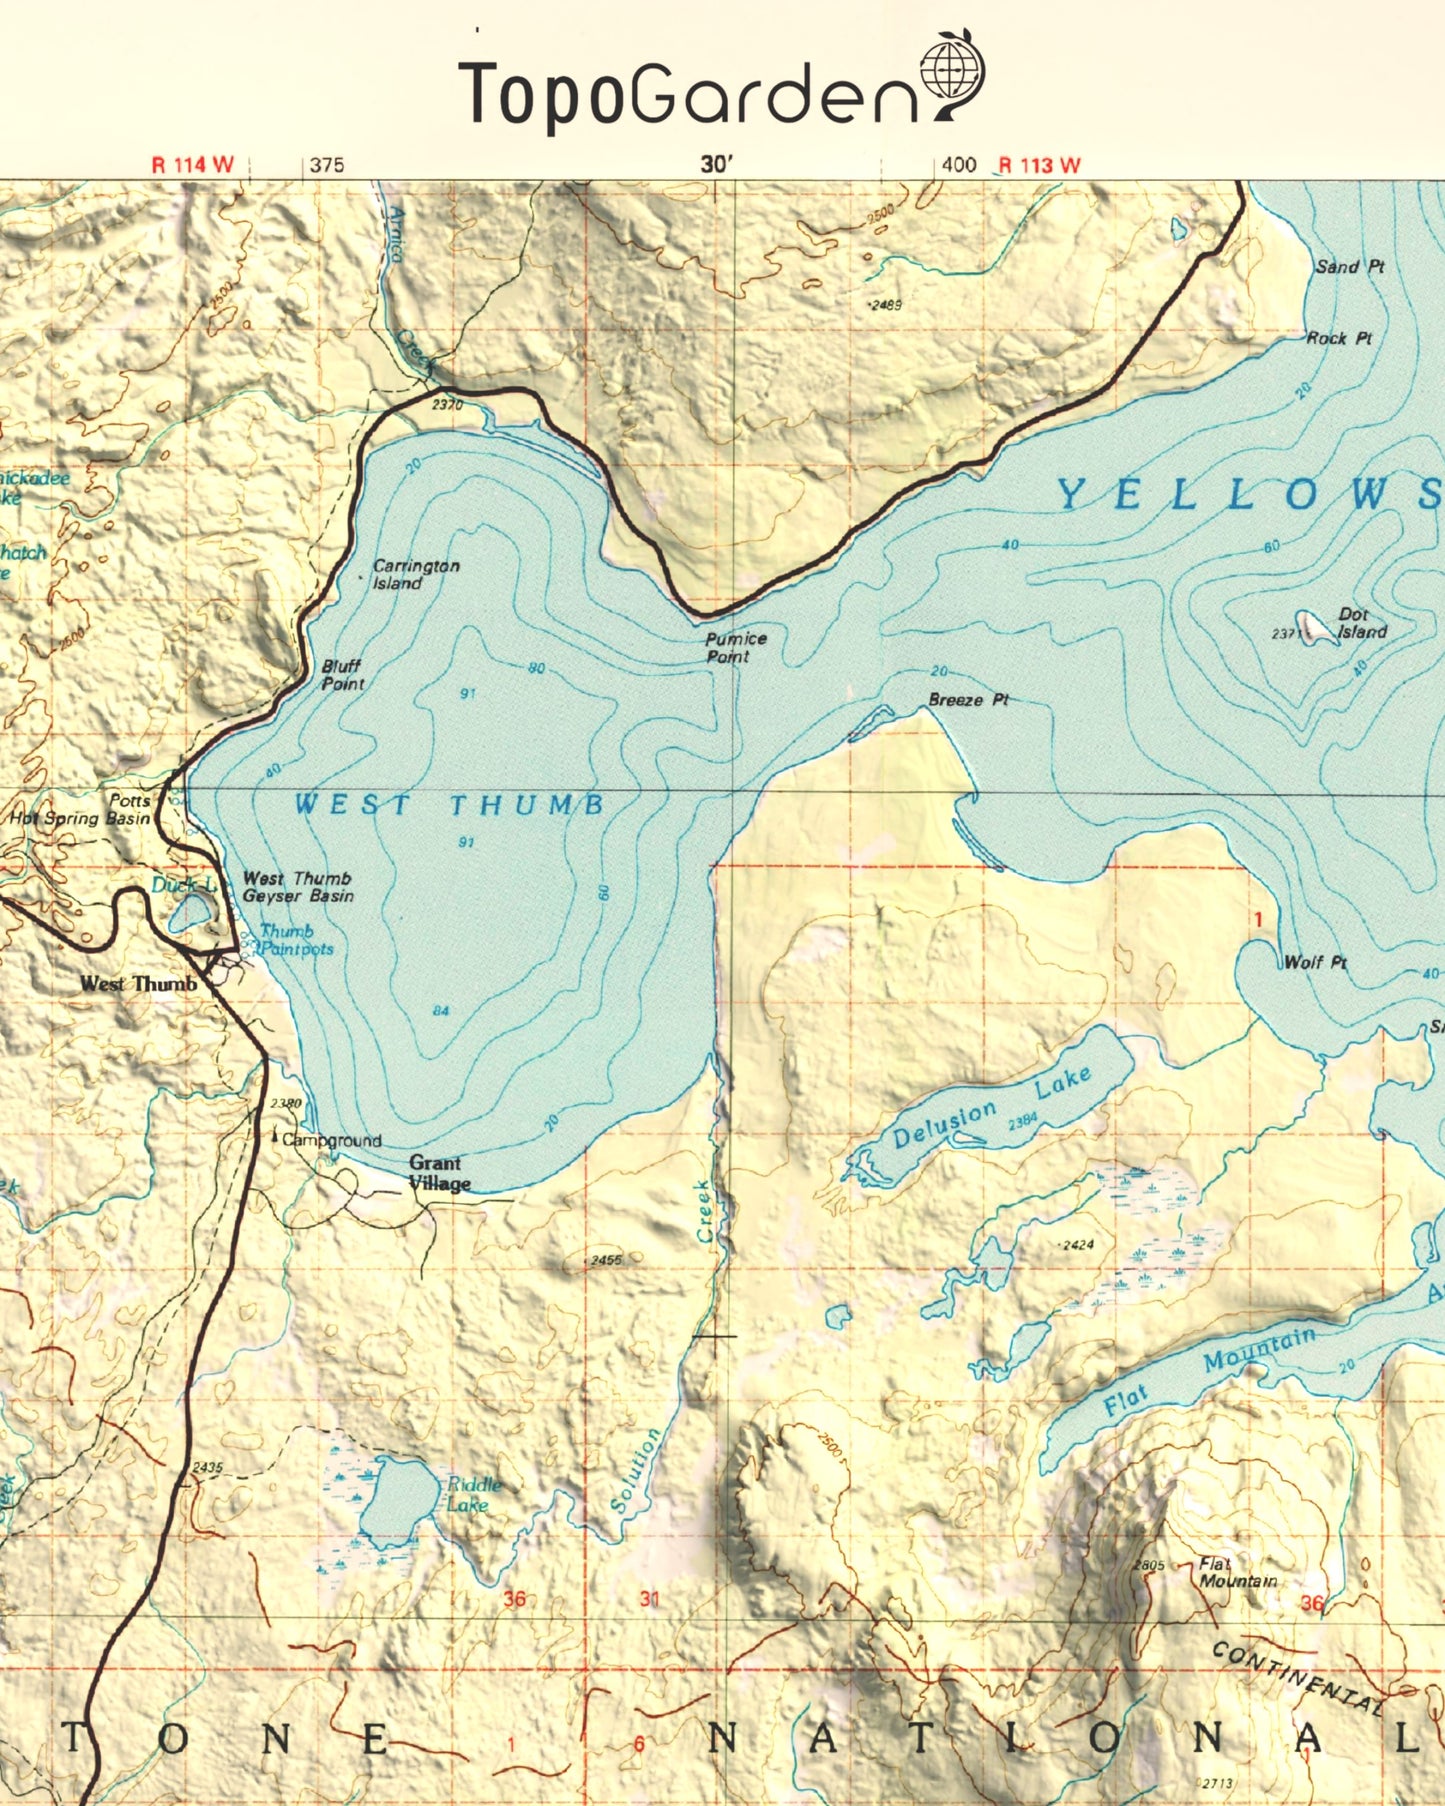 1982 Southern Yellowstone National Park | 30'x60' Shaded Historic USGS Map